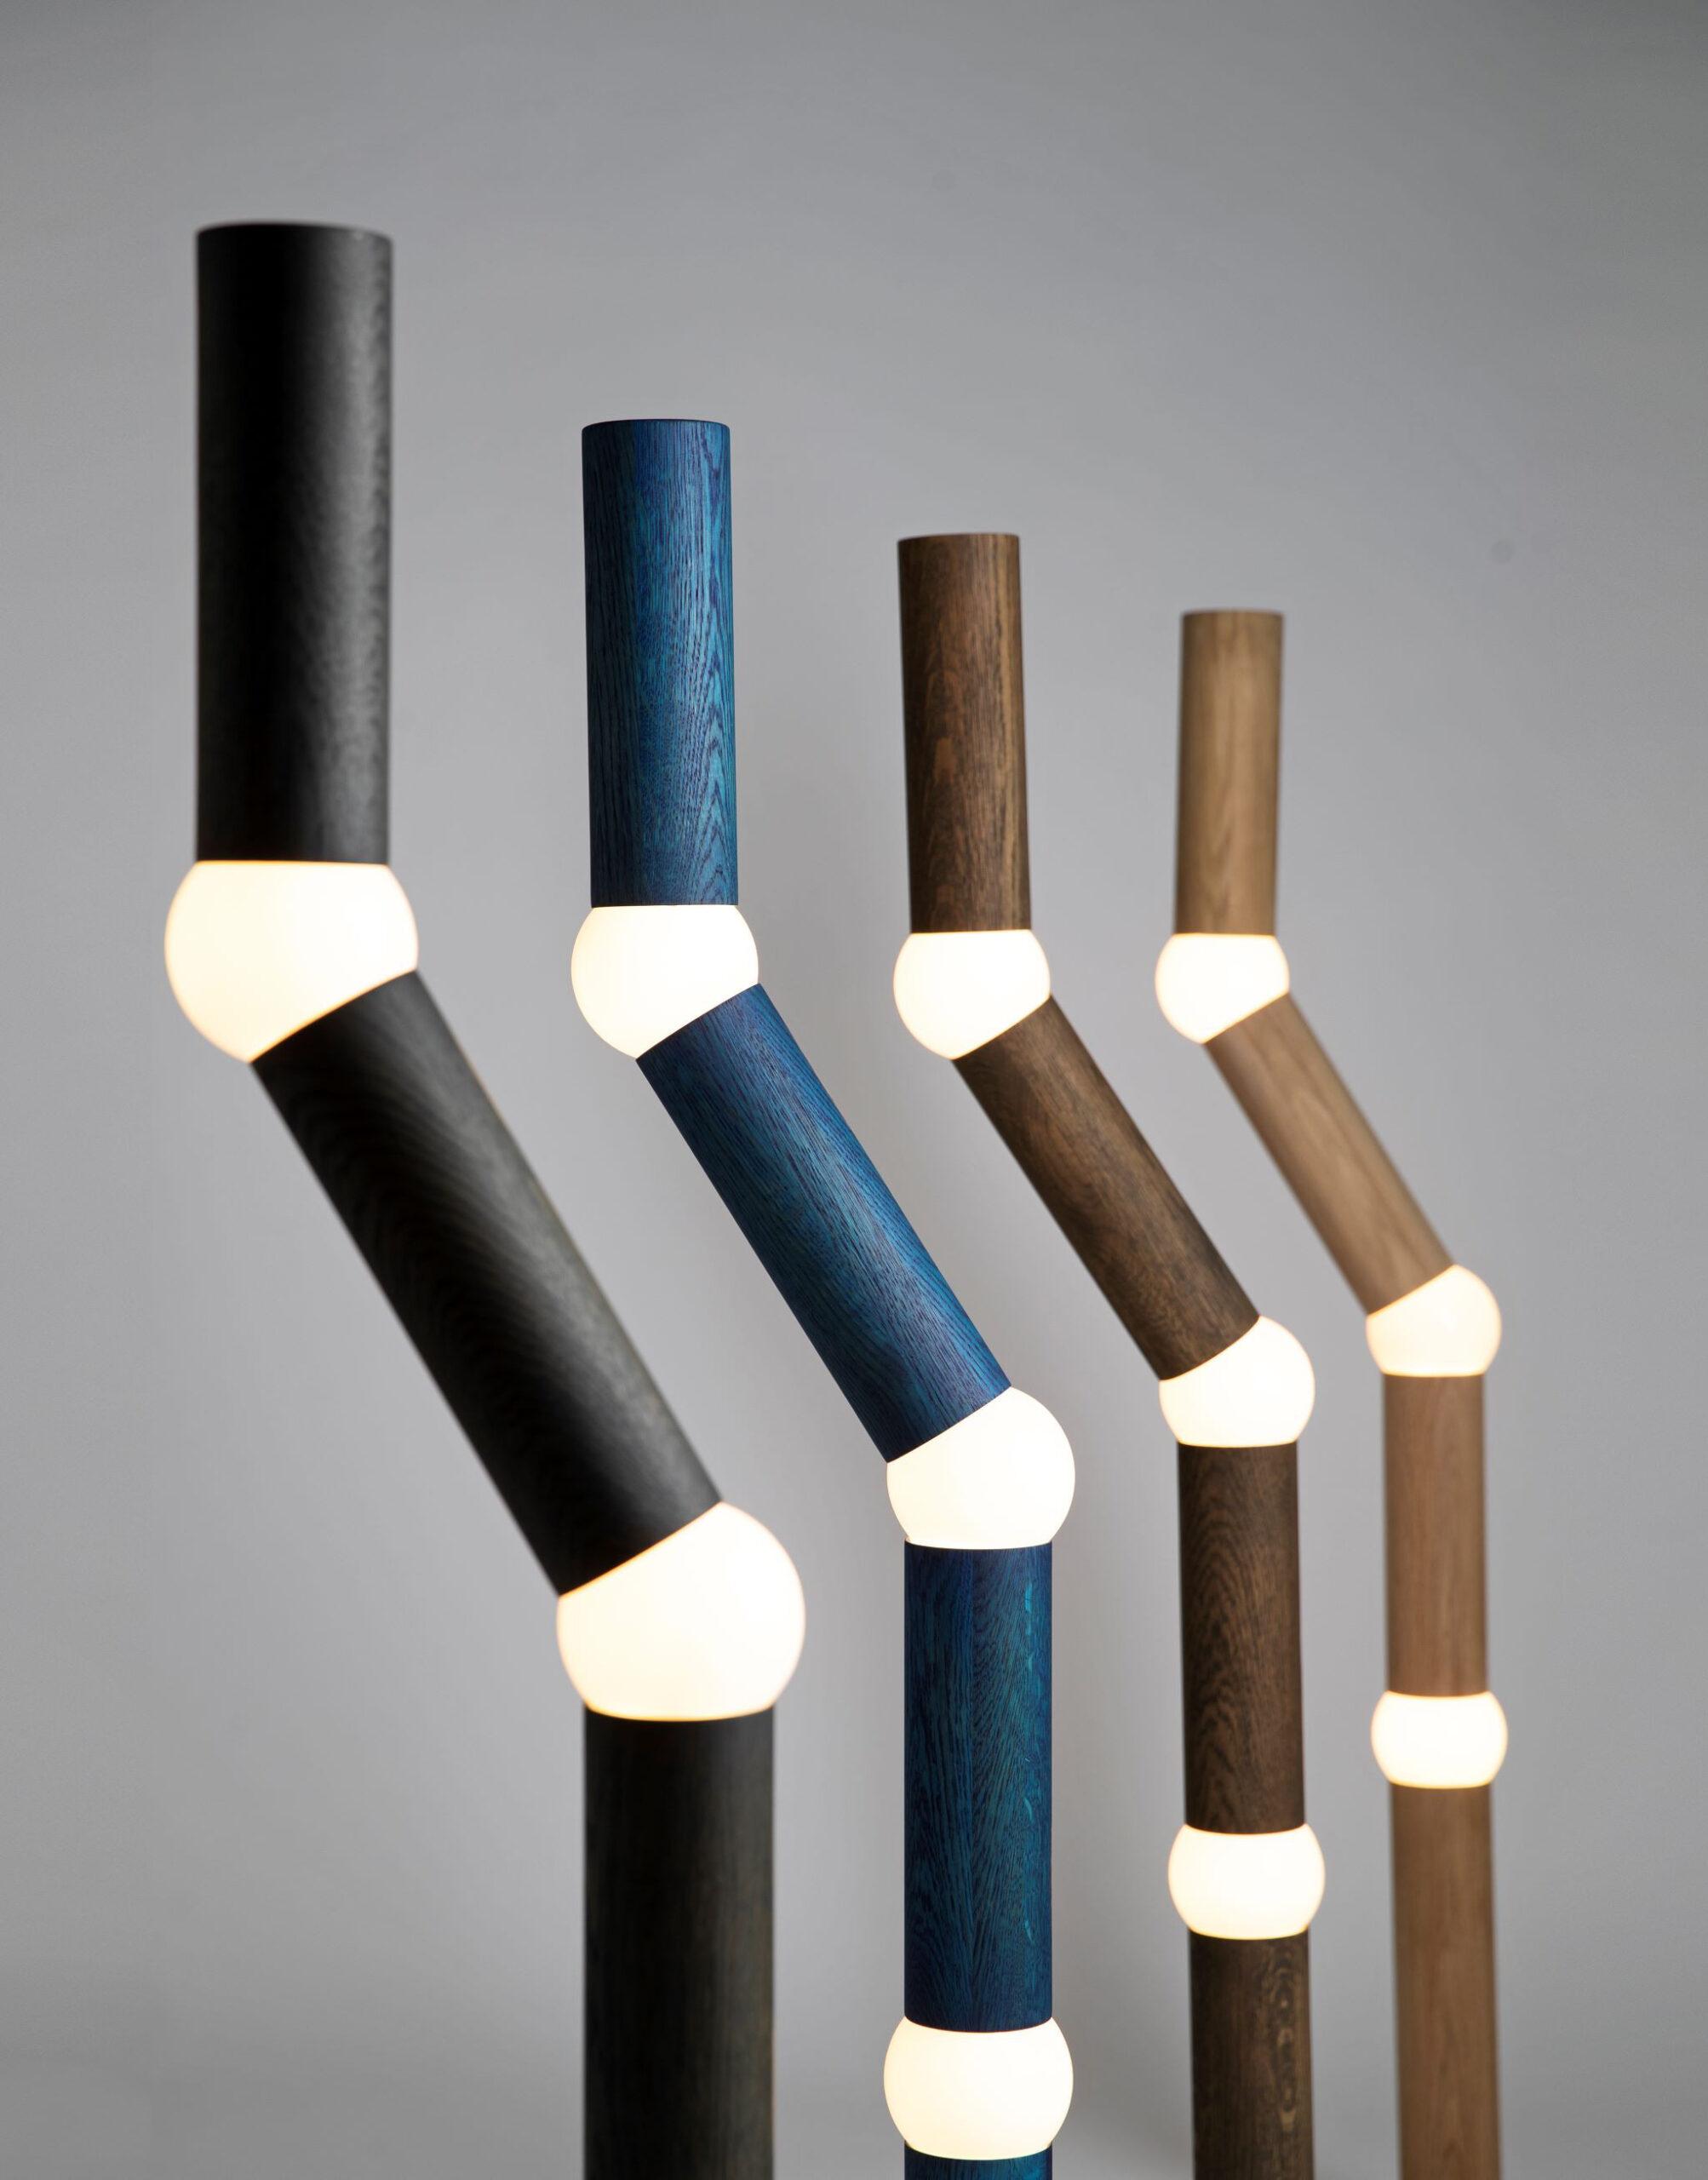 Four designer lamps inspired by bamboo.